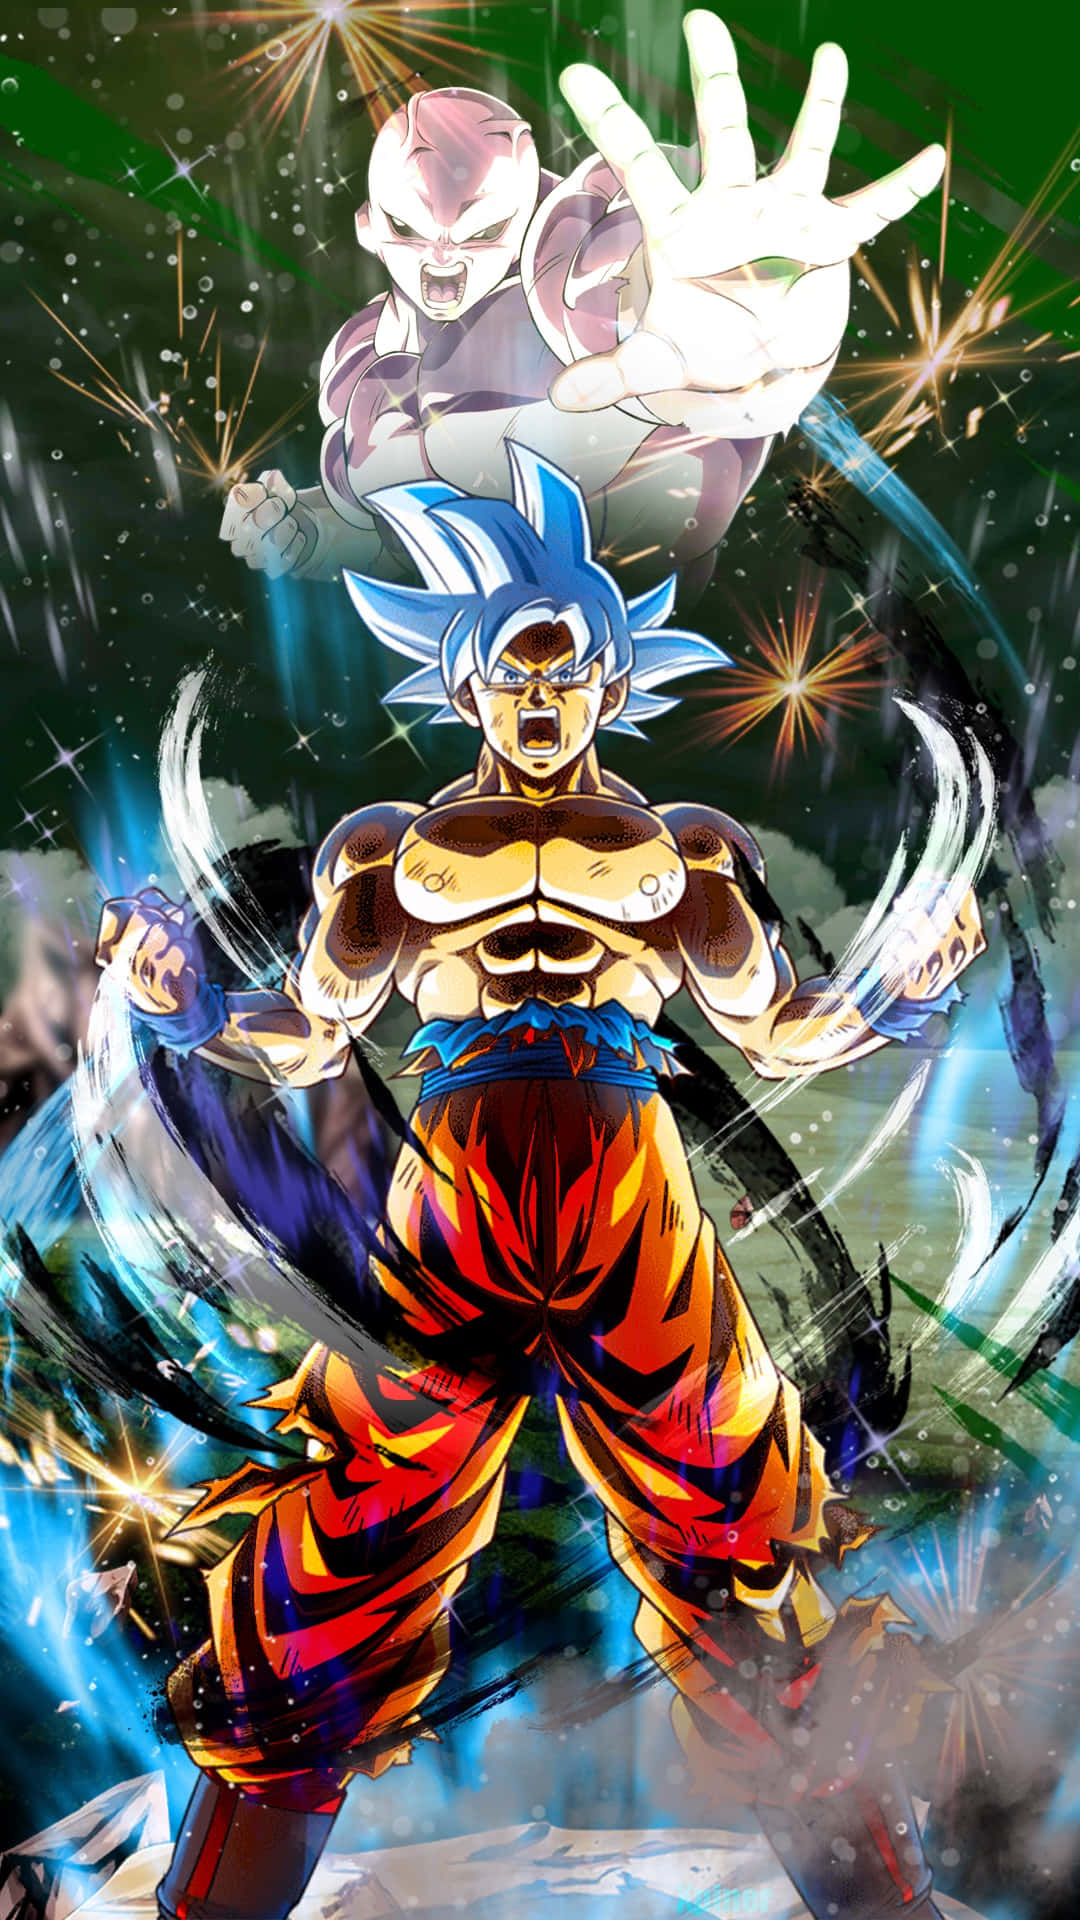 Goku is ready to make the ultimate sacrifice to save the world in the upcoming game Mui Goku" Wallpaper